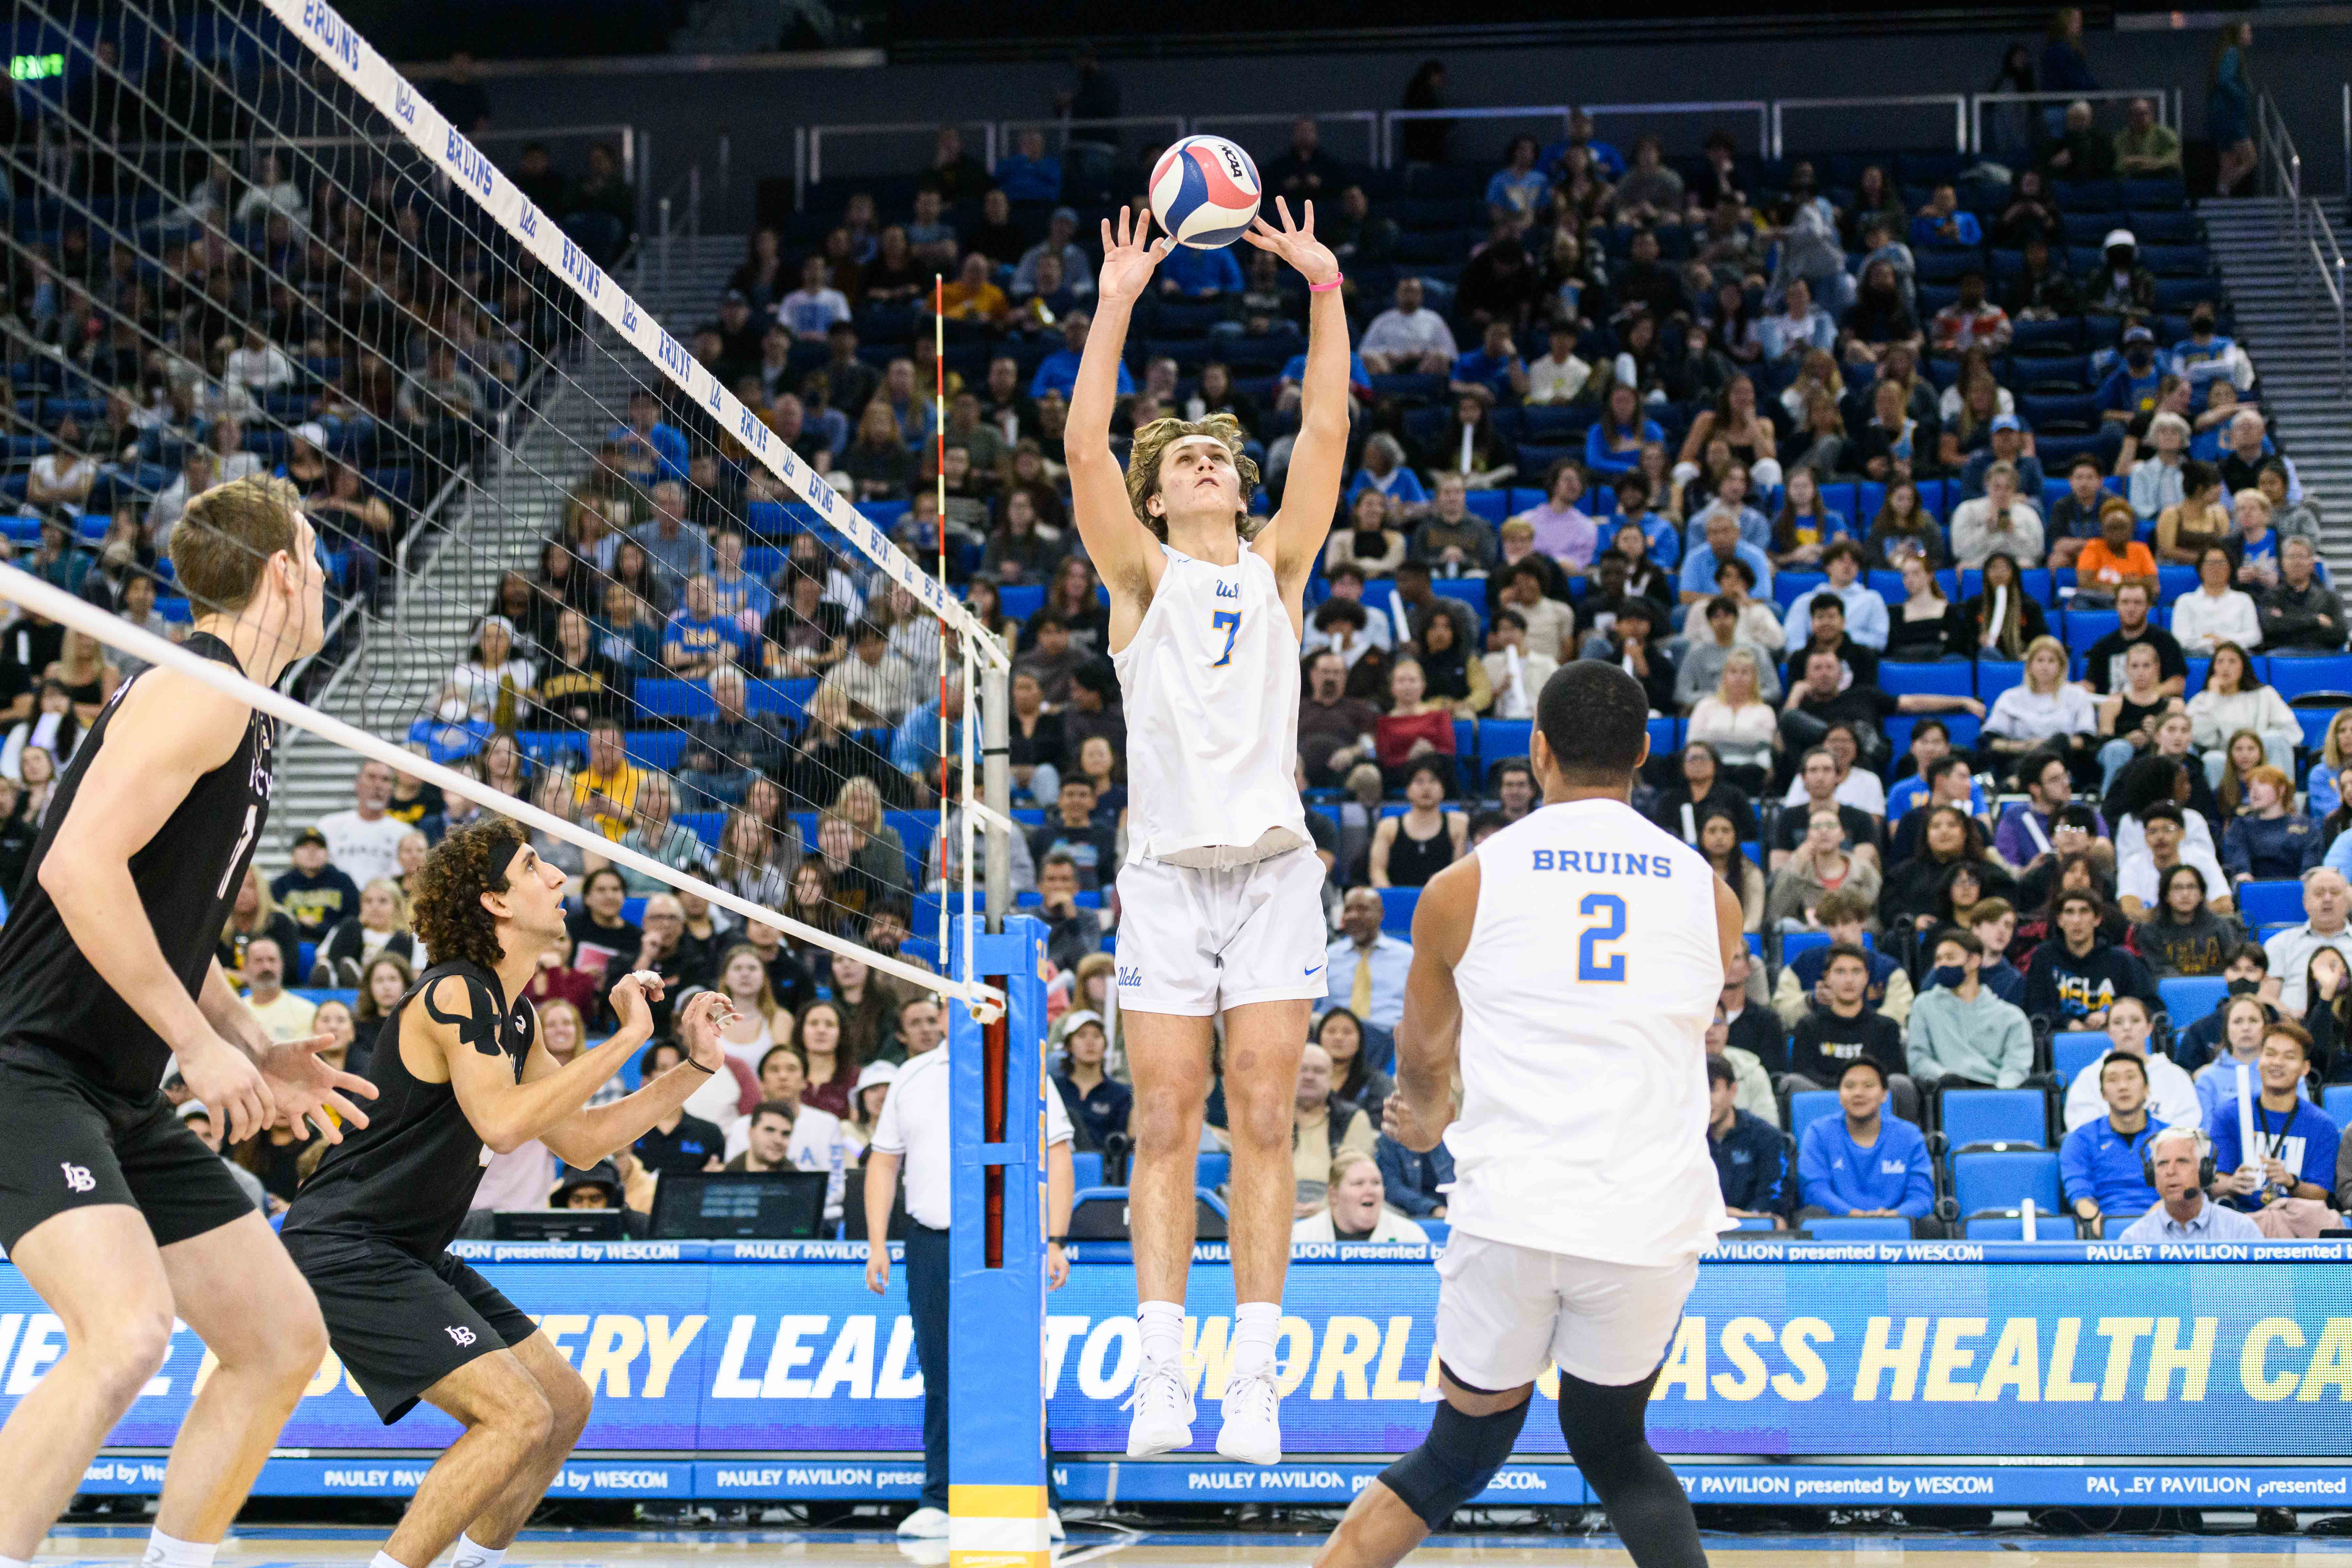 Andrew Rowan steps up as lead setter for UCLA mens volleyball